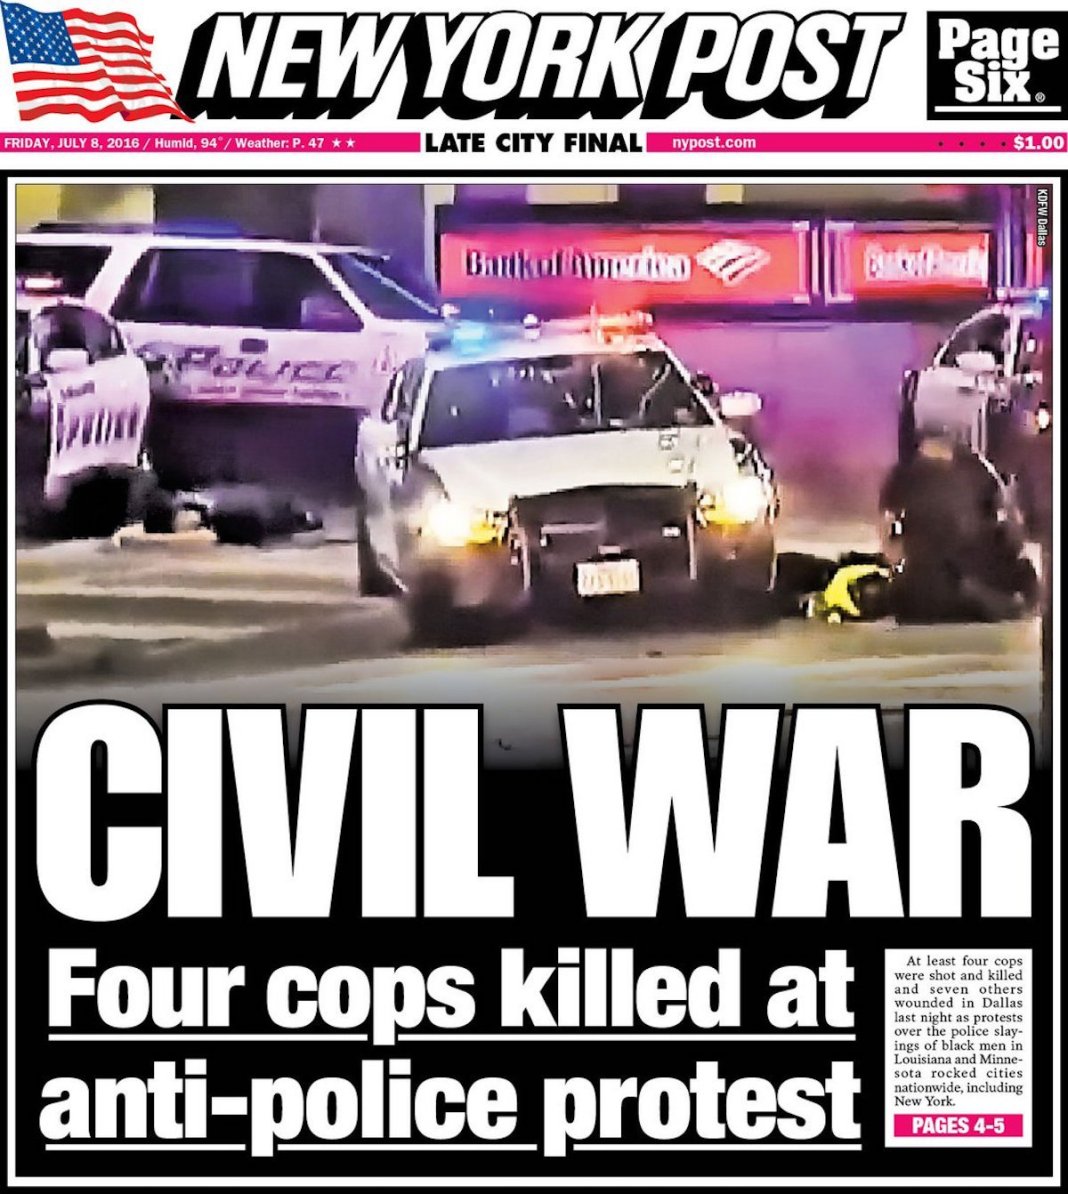 The New York Post front page after the Dallas attack shows the powerful fears this event has been used to awaken. 